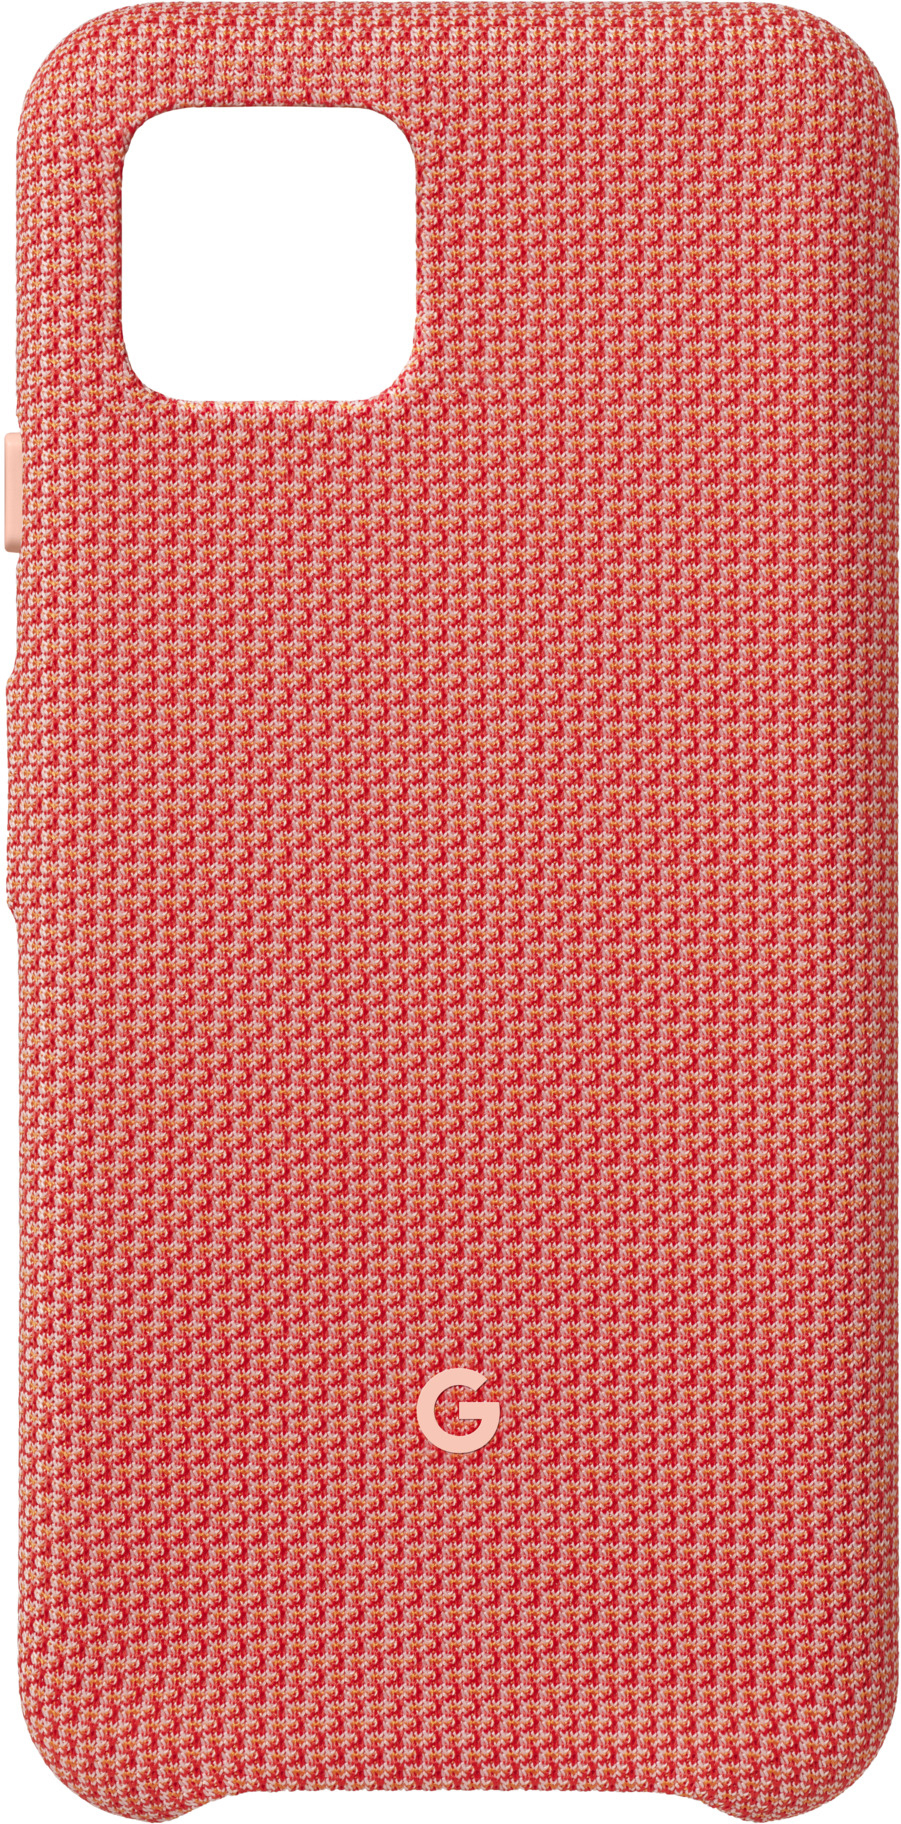 GOOGLE GA01282, Could Backcover, 4, Pixel Google, be Coral